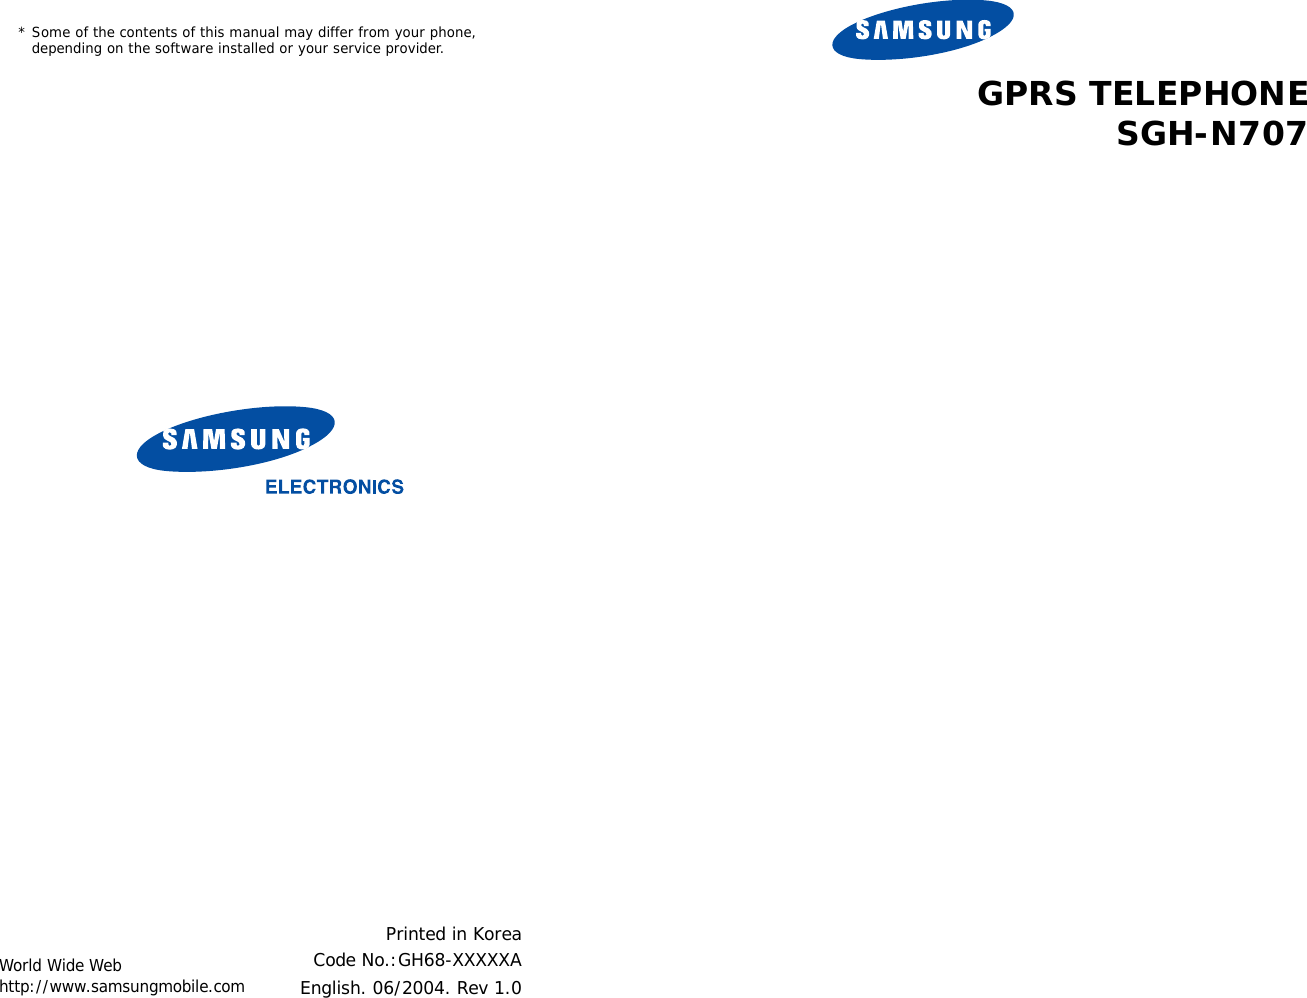 * Some of the contents of this manual may differ from your phone, depending on the software installed or your service provider.World Wide Webhttp://www.samsungmobile.comPrinted in Korea   Code No.:GH68-XXXXXAEnglish. 06/2004. Rev 1.0GPRS TELEPHONESGH-N707